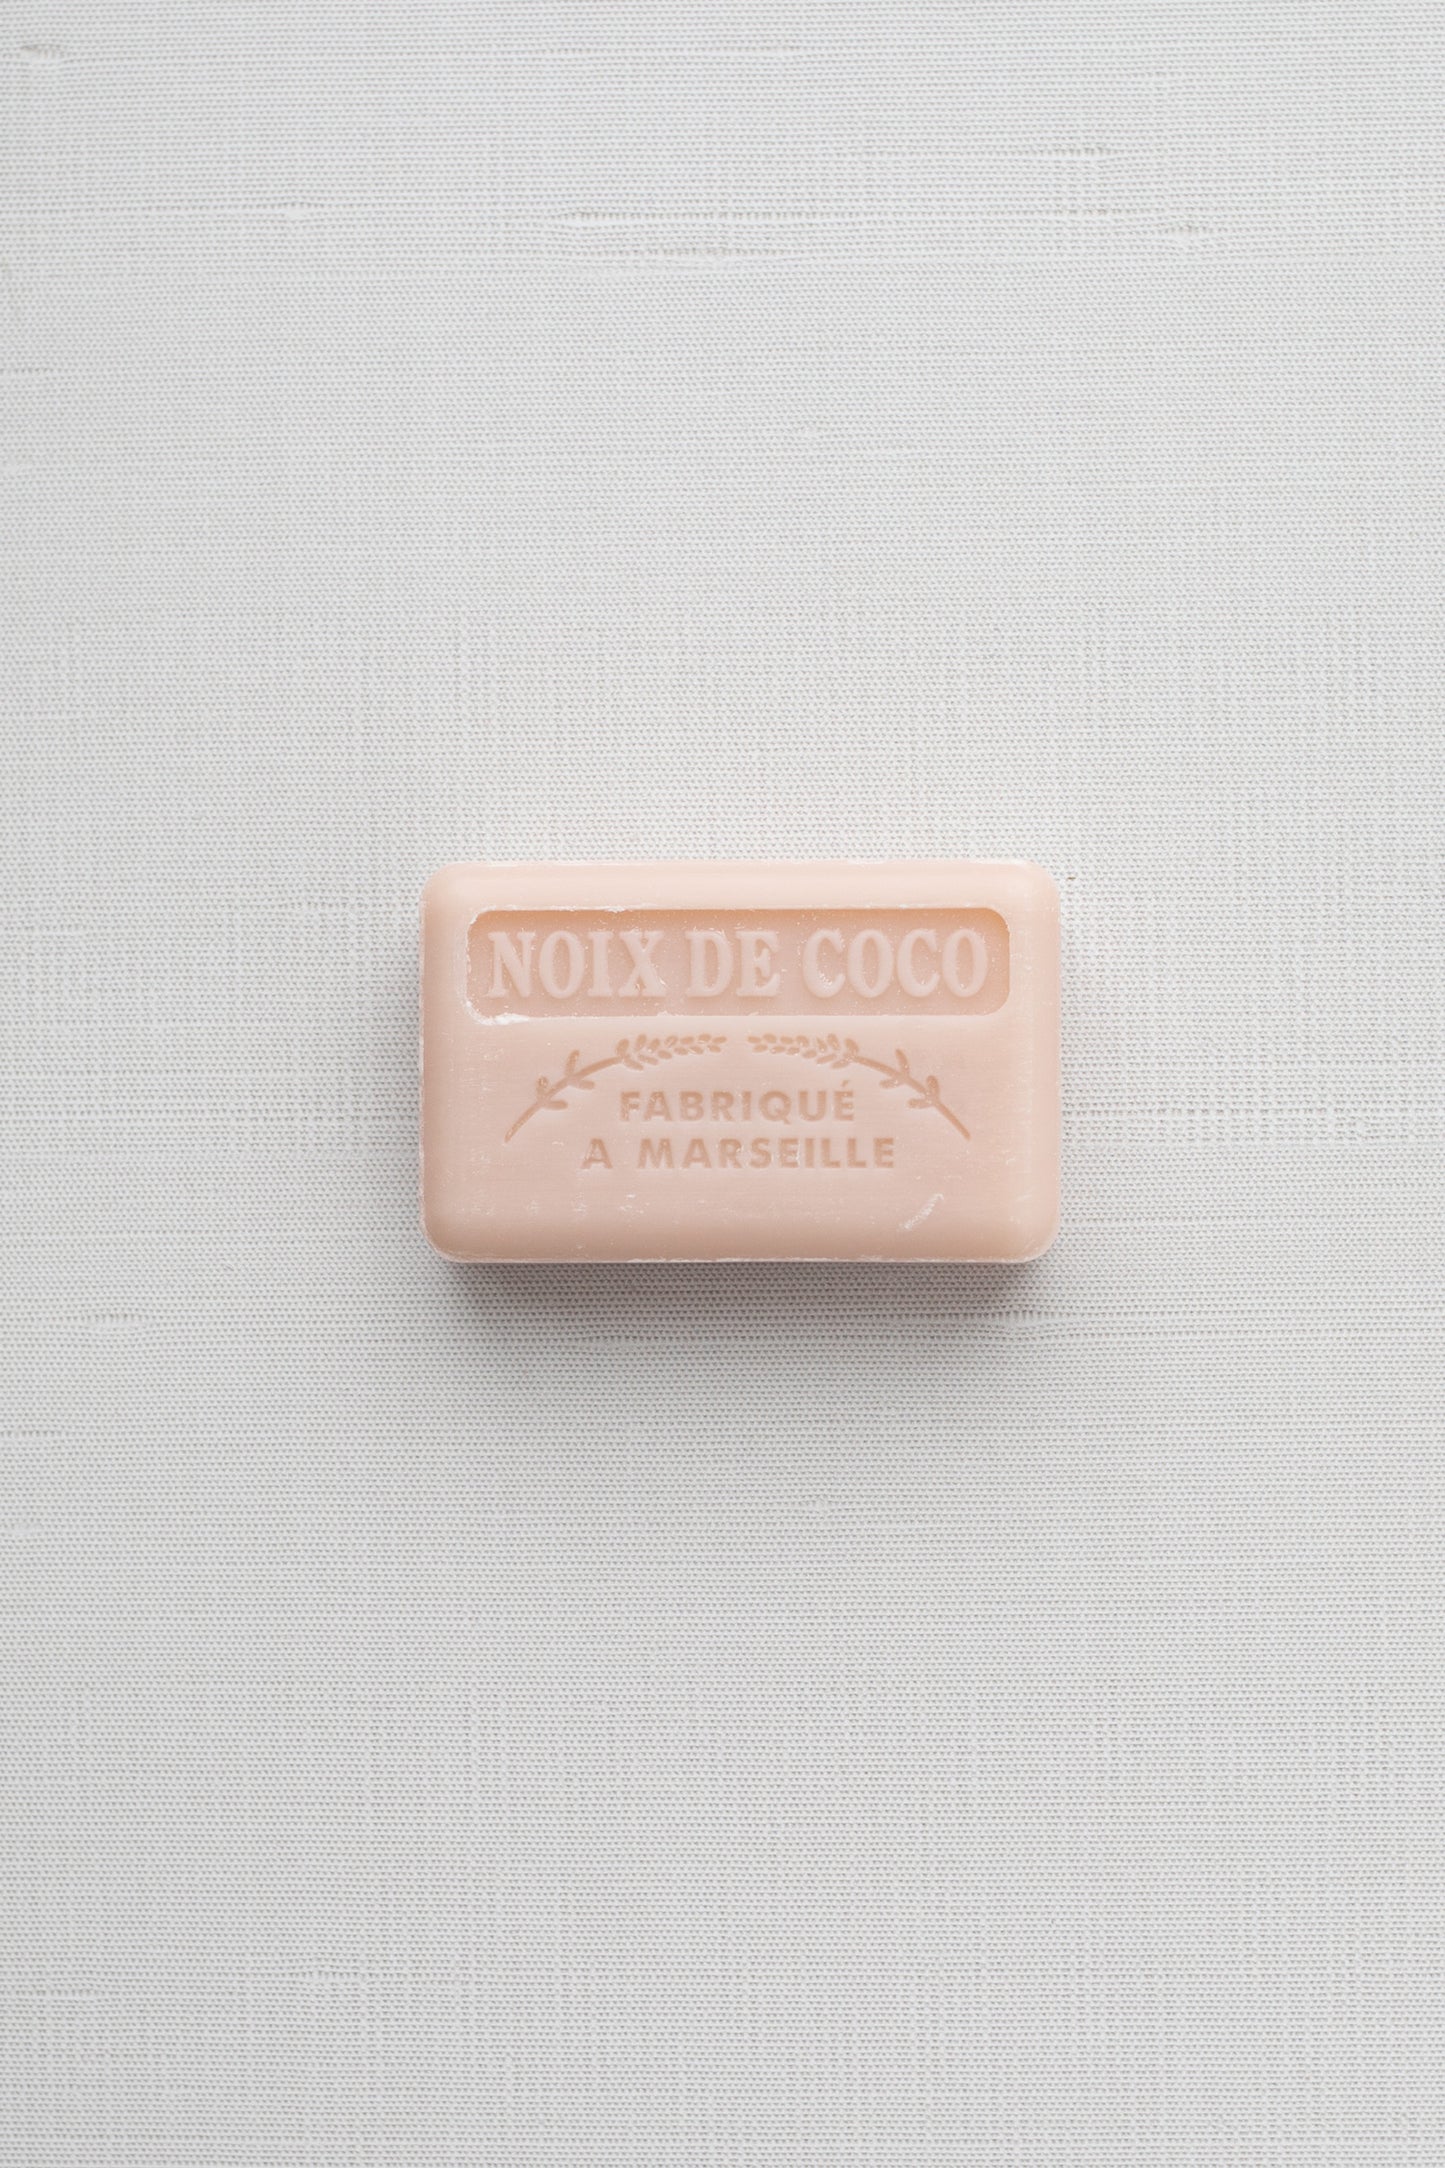 Coconut French Soap